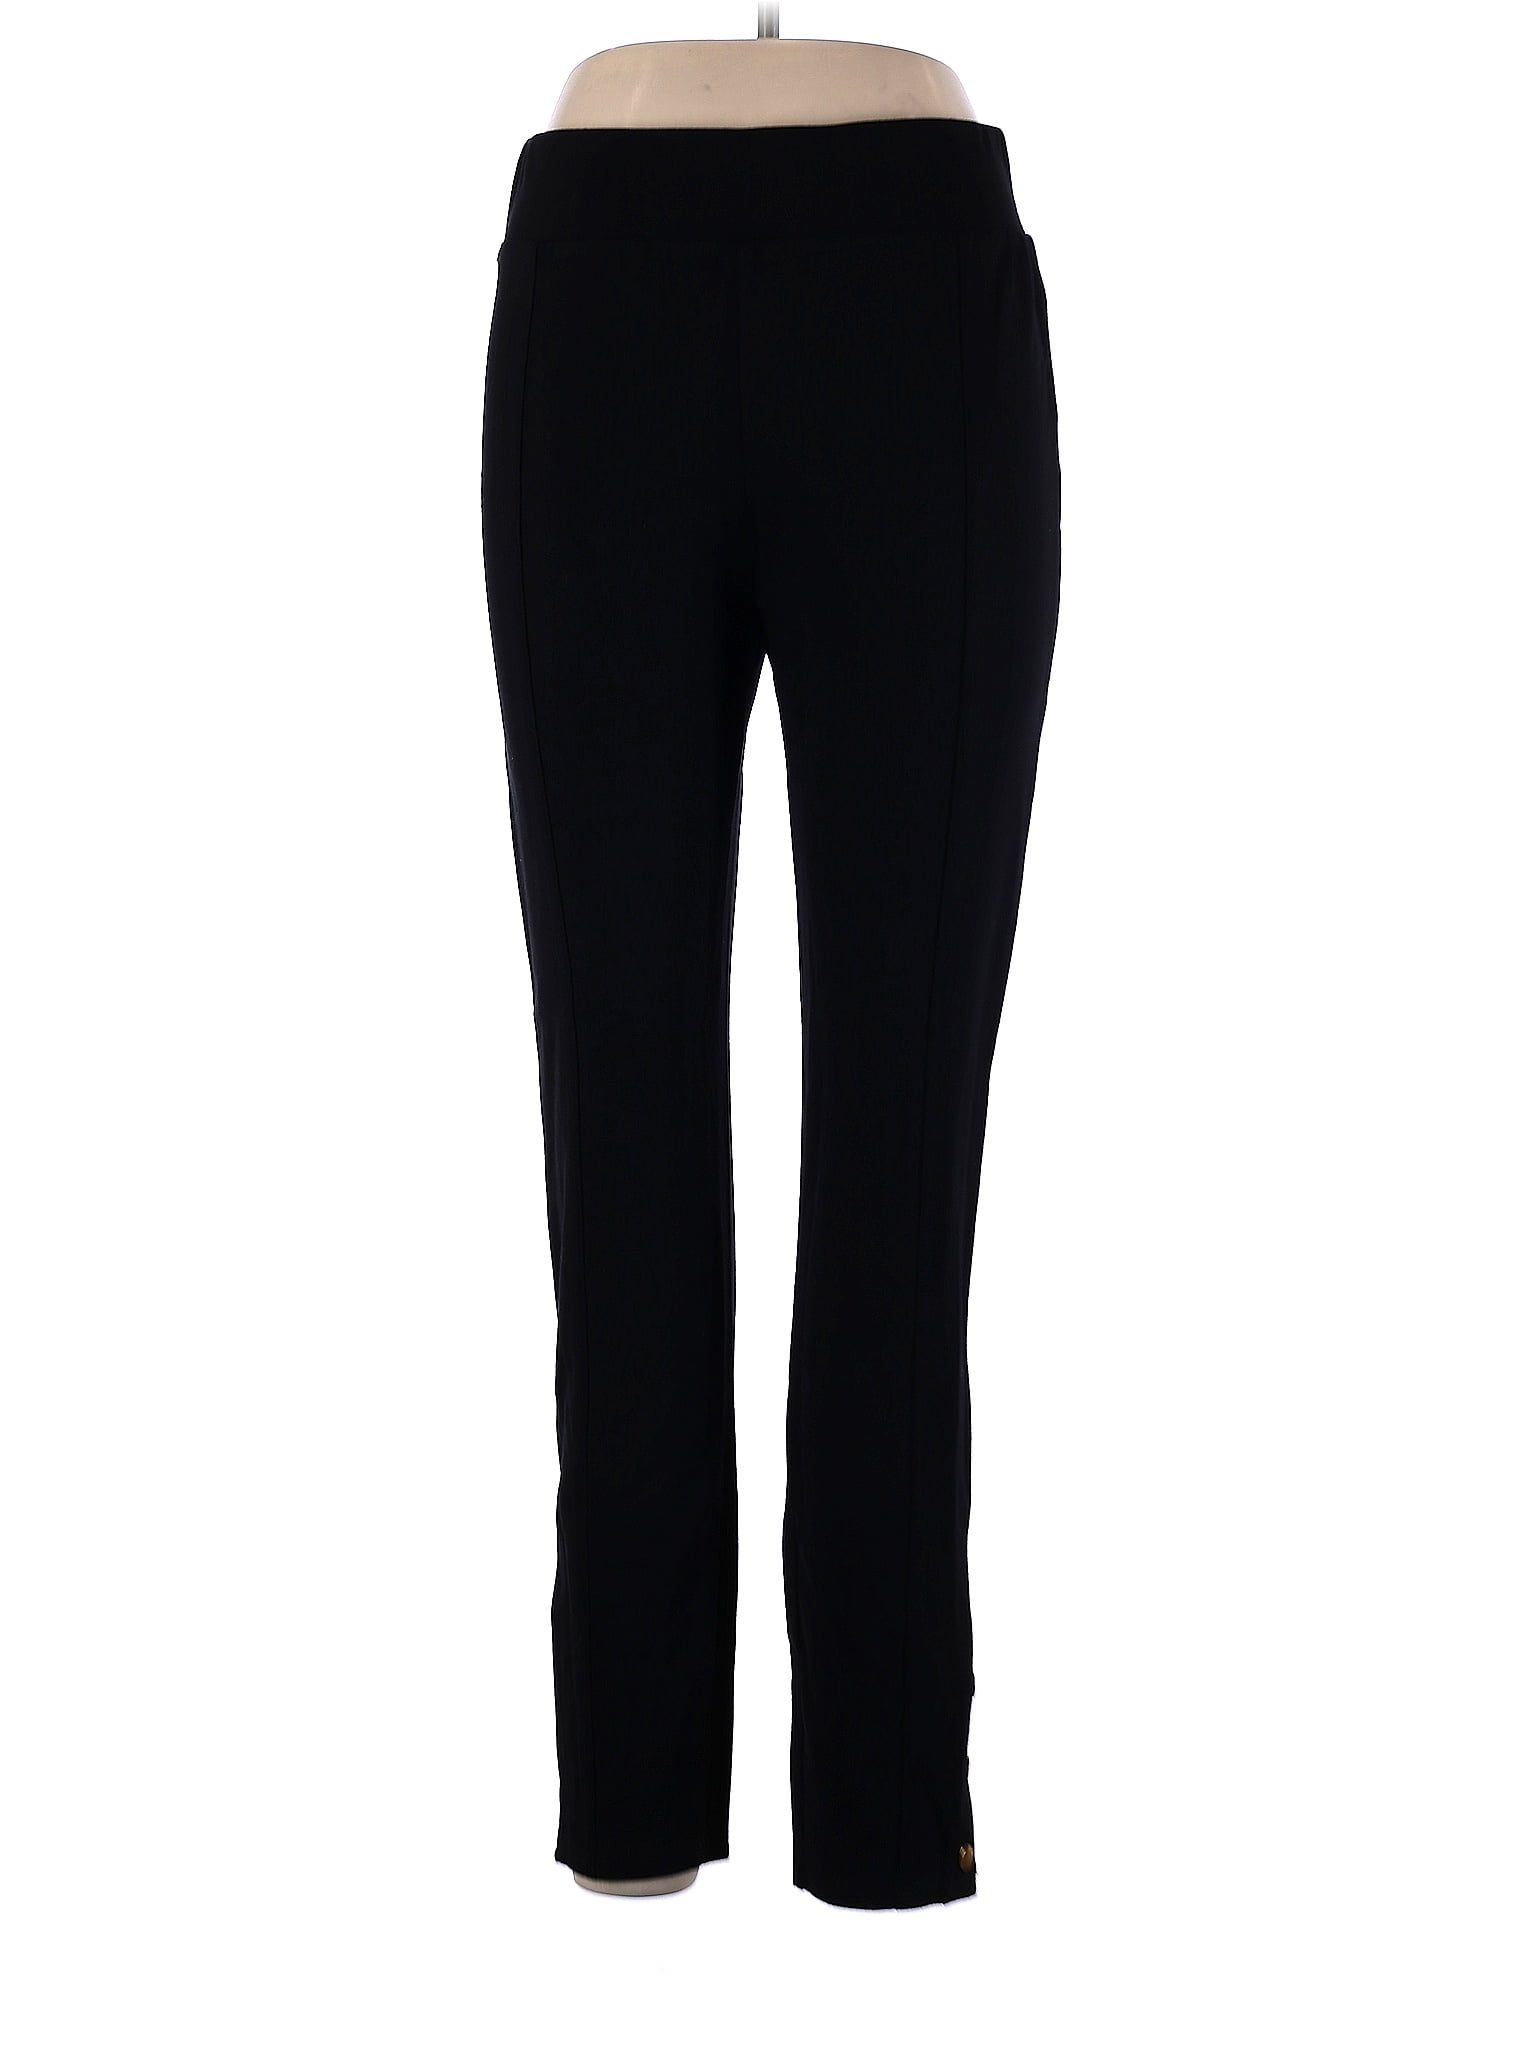 Suzanne Betro Black Casual Pants for Women